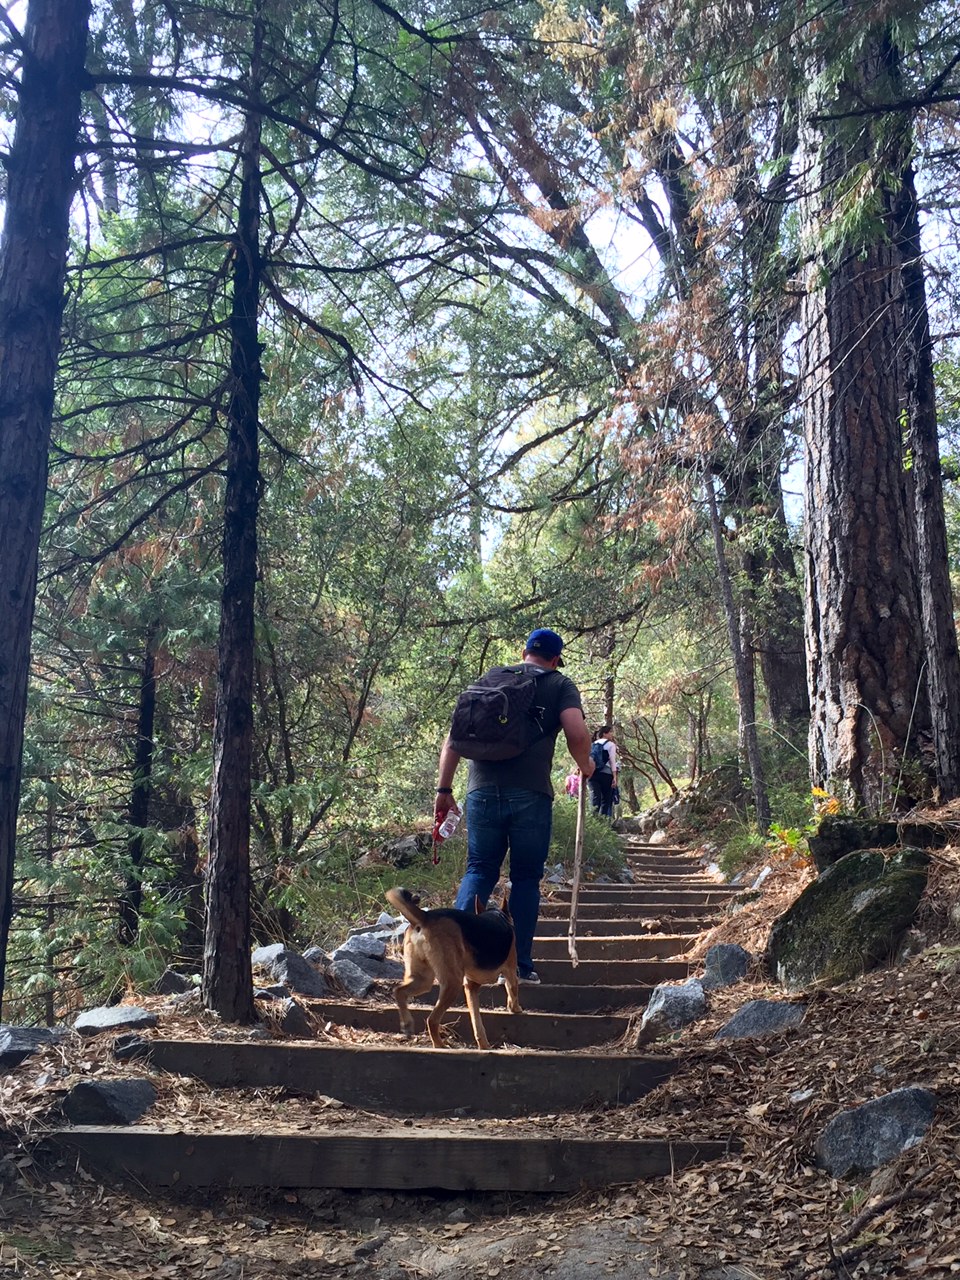 Lewis Creek Trail is both dog-friendly and well-maintained.